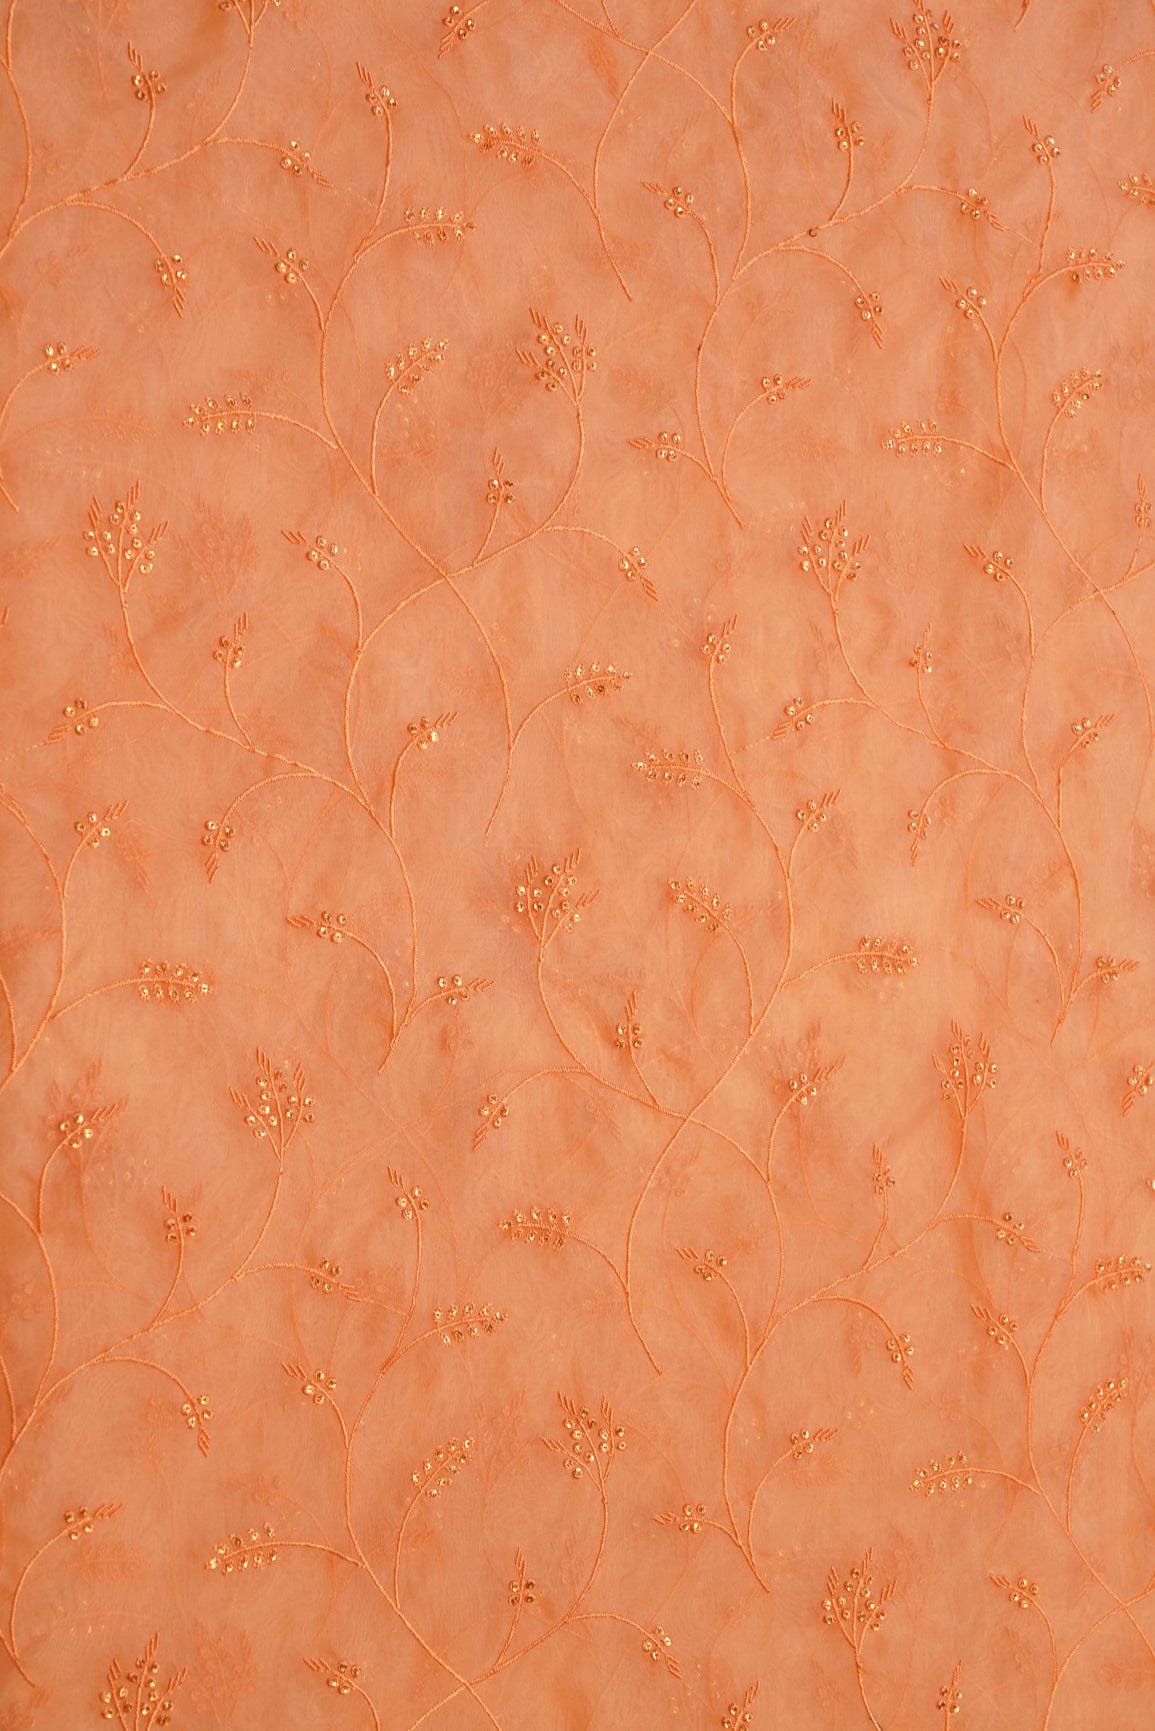 doeraa Embroidery Fabrics Gold Sequins With Peach Thread Floral Embroidery On Peach Organza Fabric